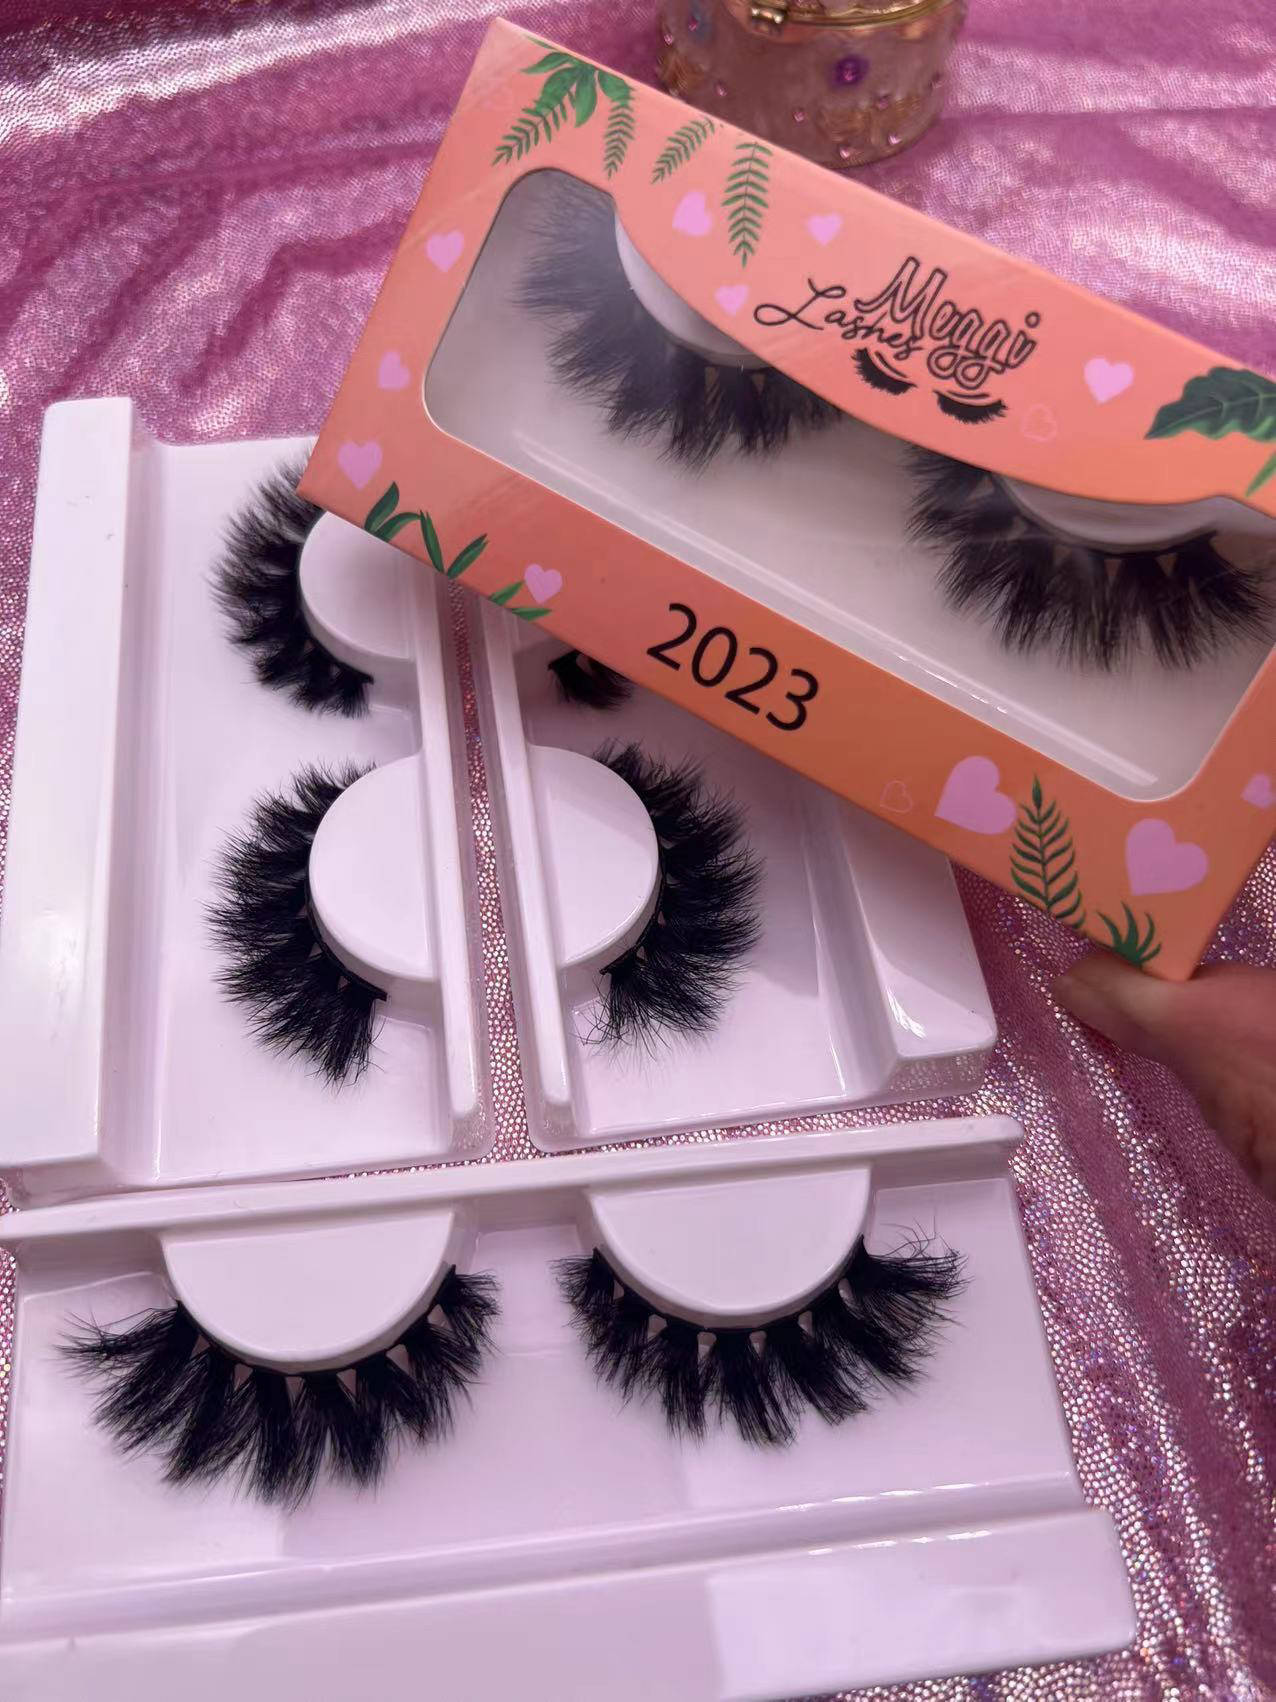 2023 lash (Amber collection)